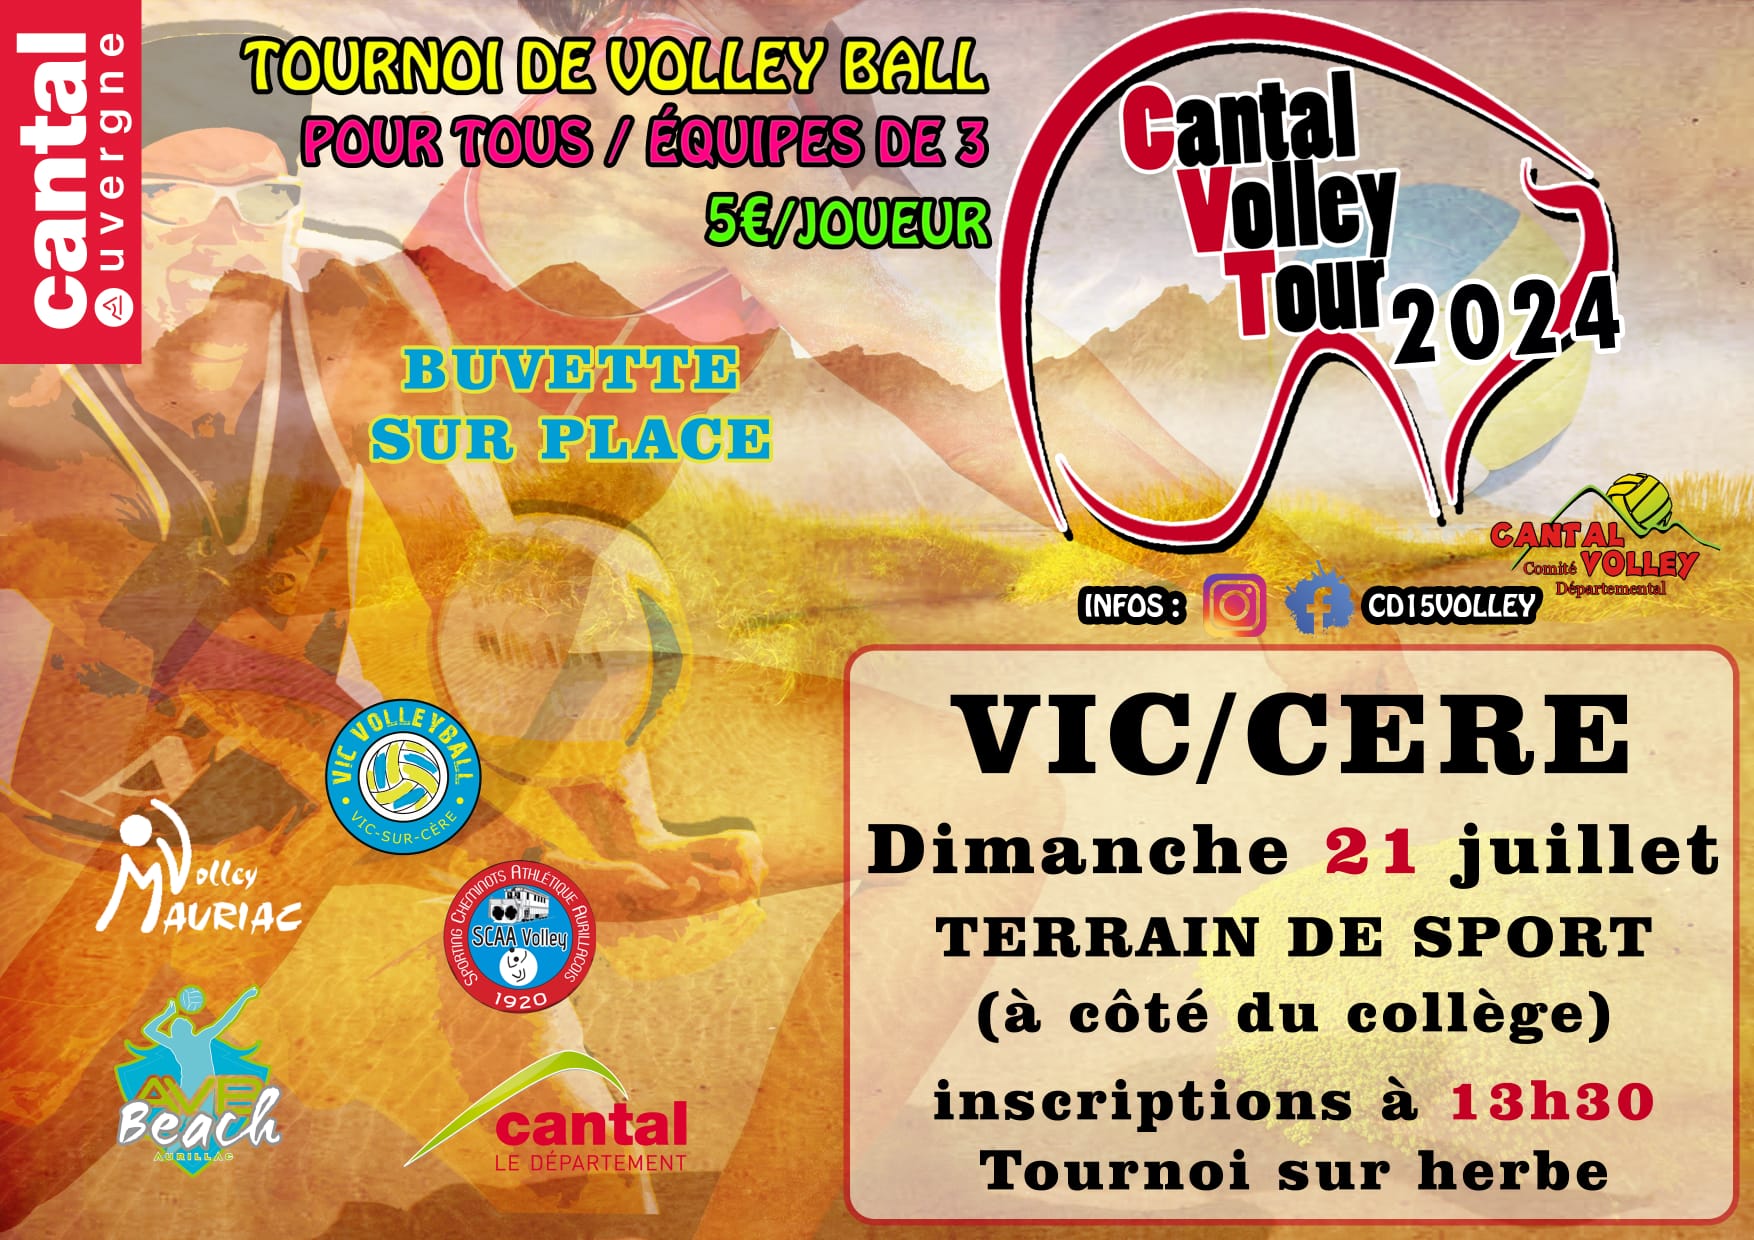 Cantal Volley Tour